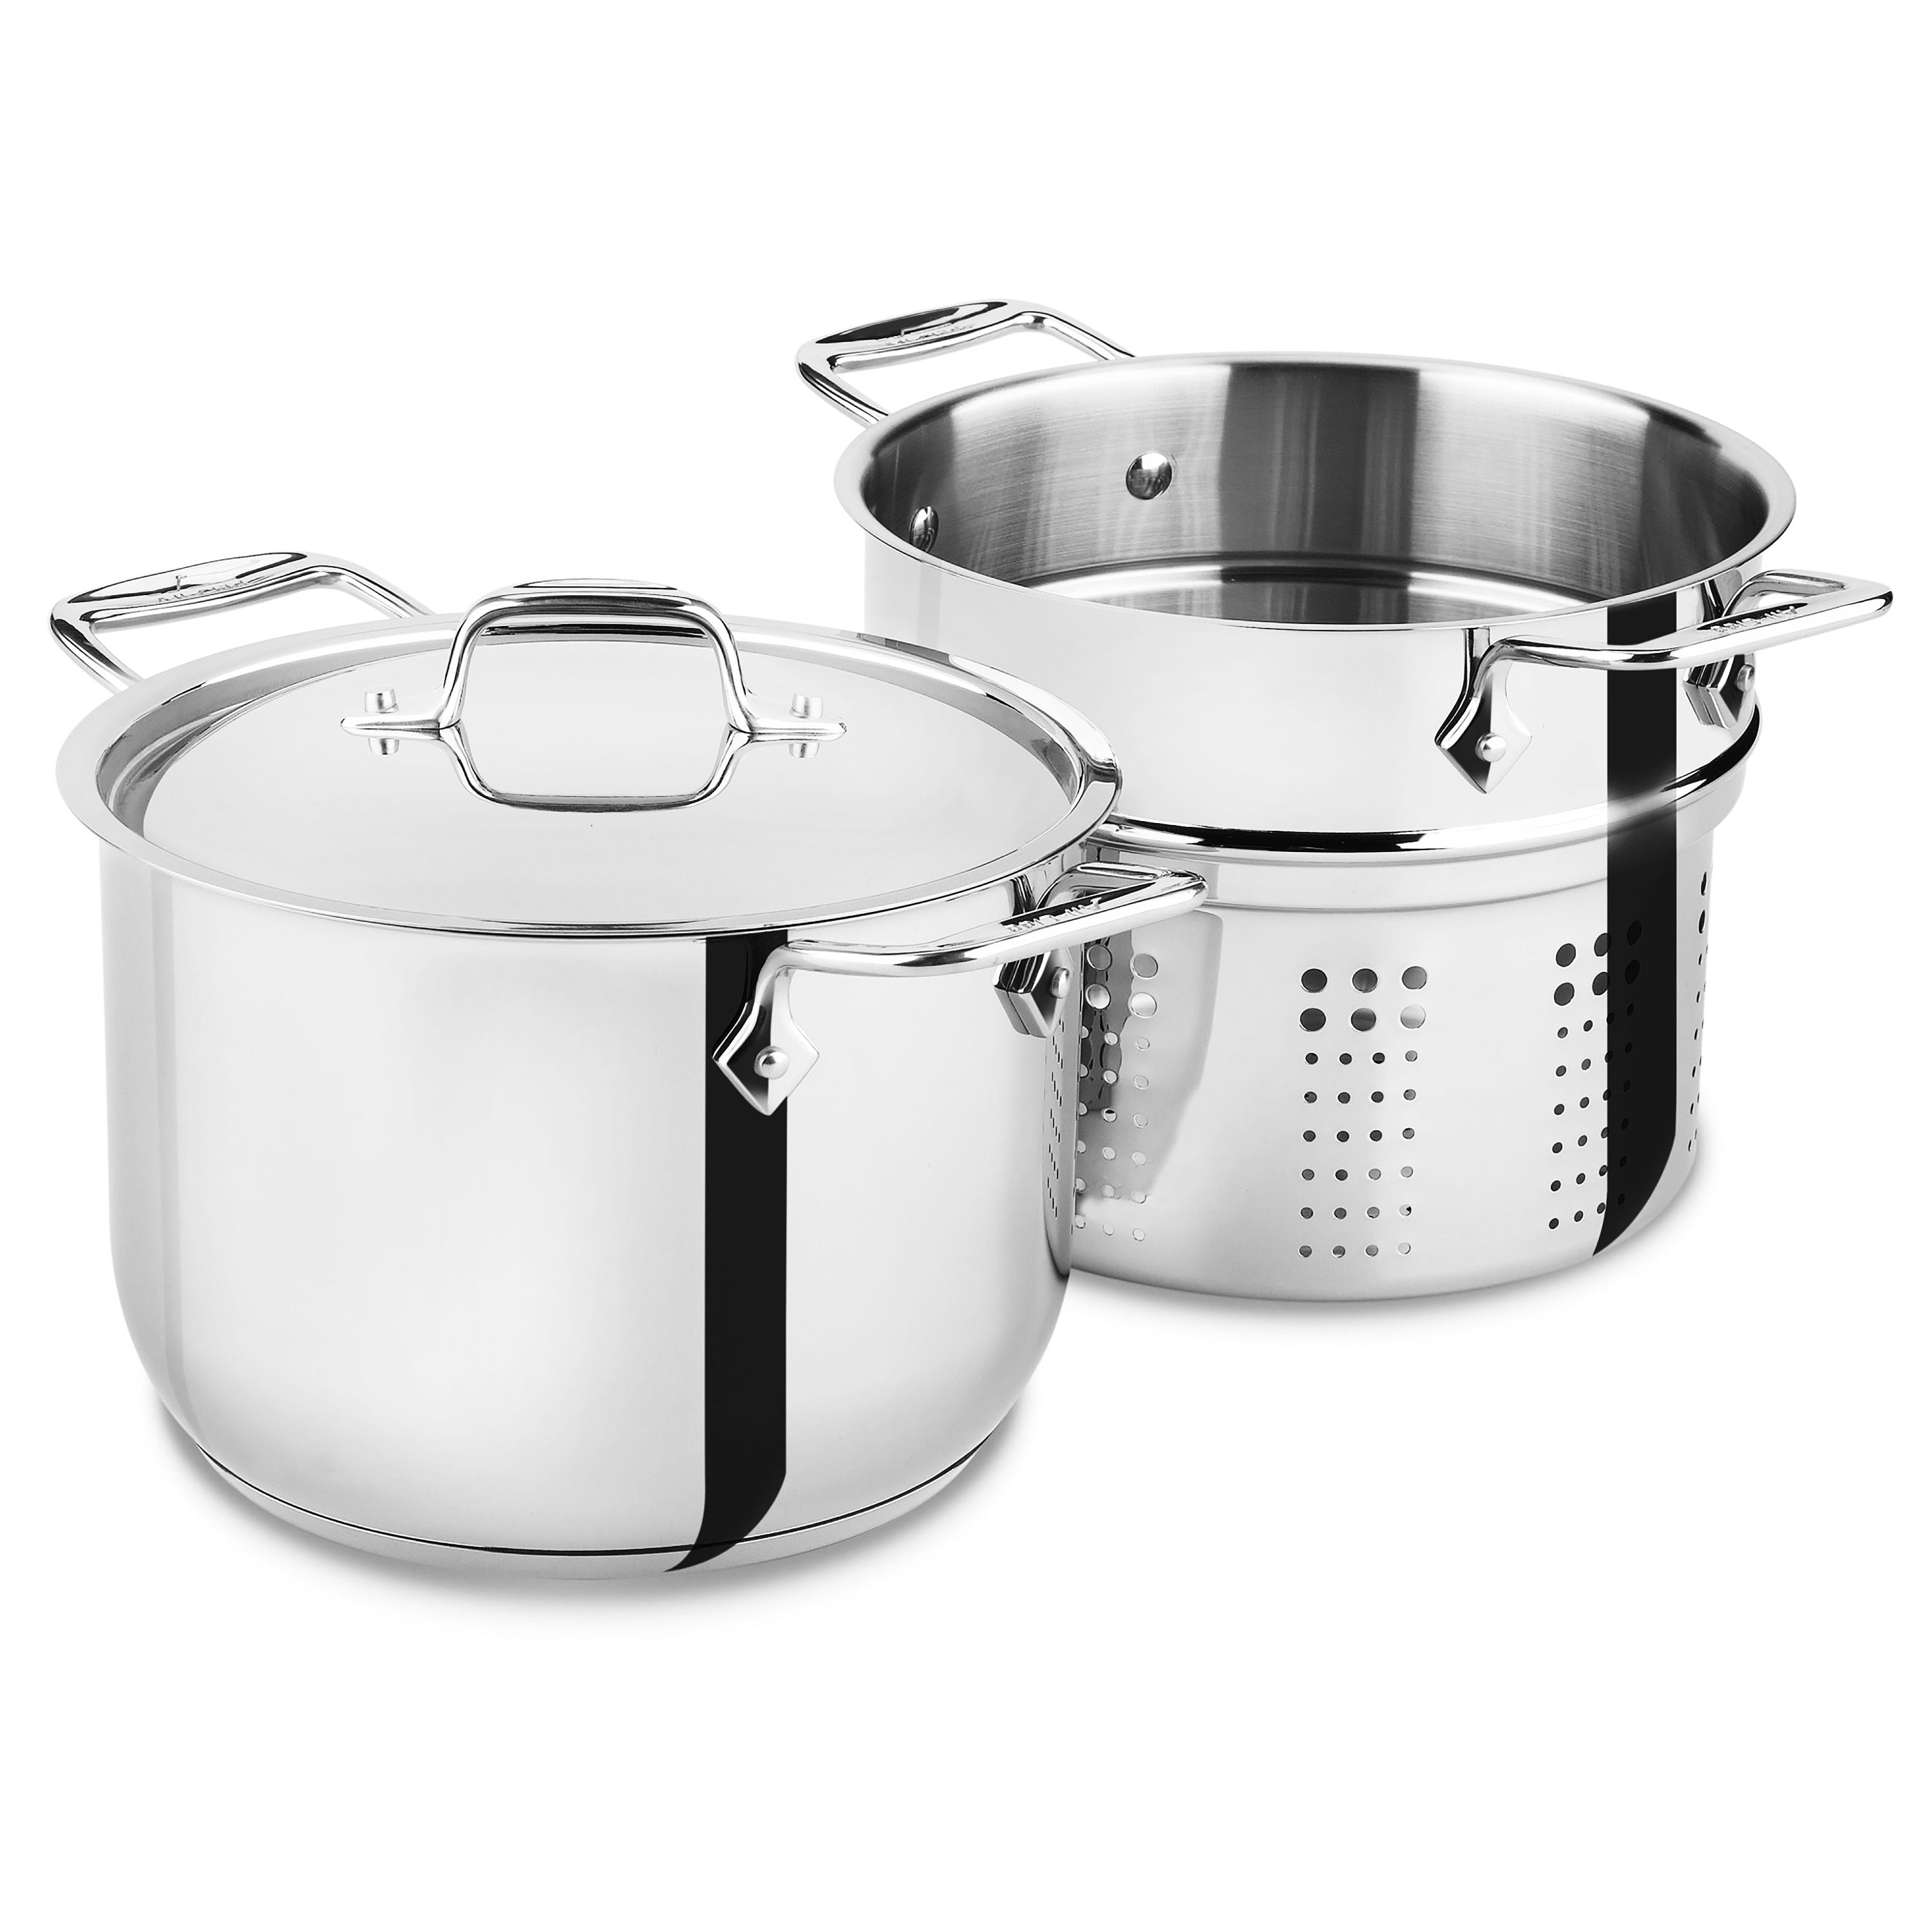 All-Clad Stainless Steel Pasta Pot - 6-quart – Cutlery and More